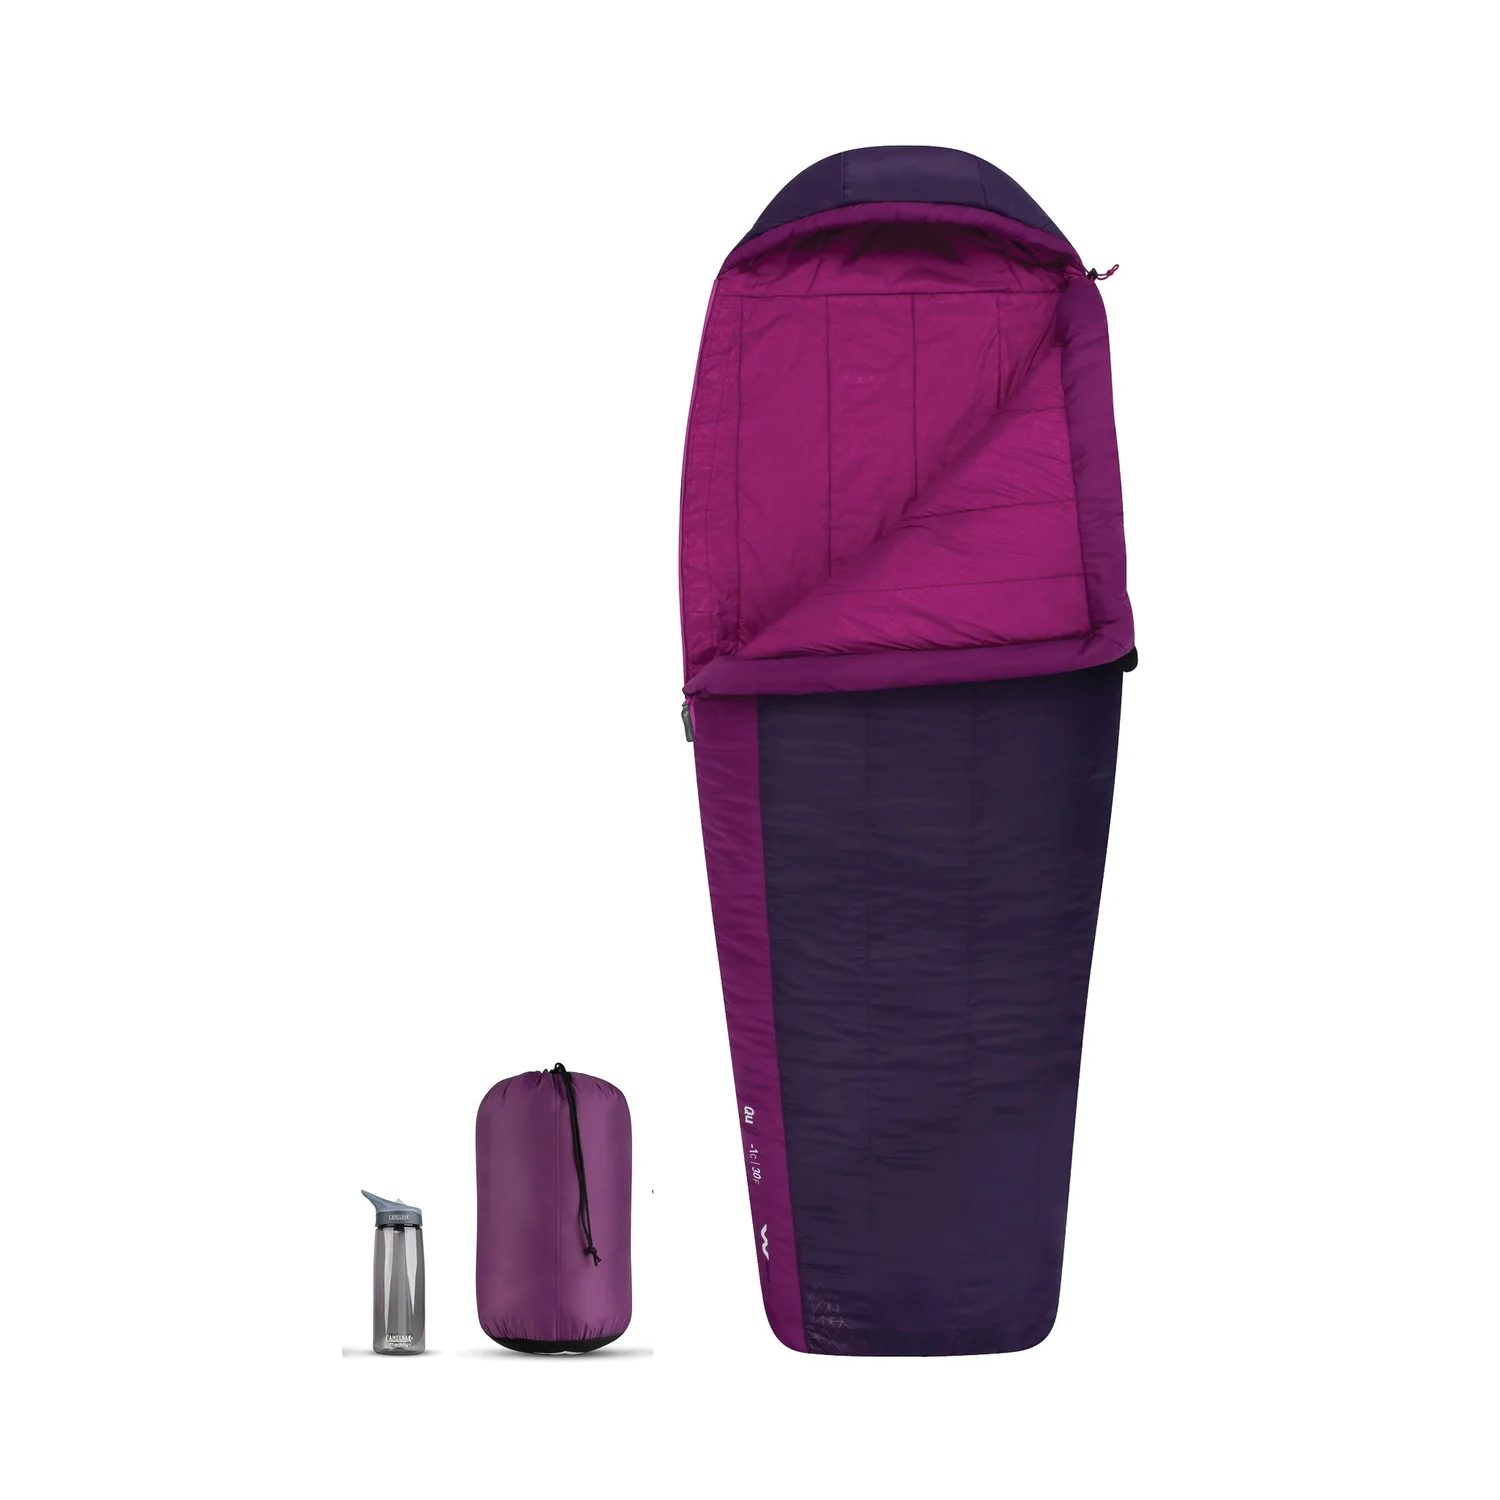 Women_s-Synthetic-Sleeping-Bag-Cold-Weather-Camping_54f89569-e135-444a-b7b1-5fd796f212b5